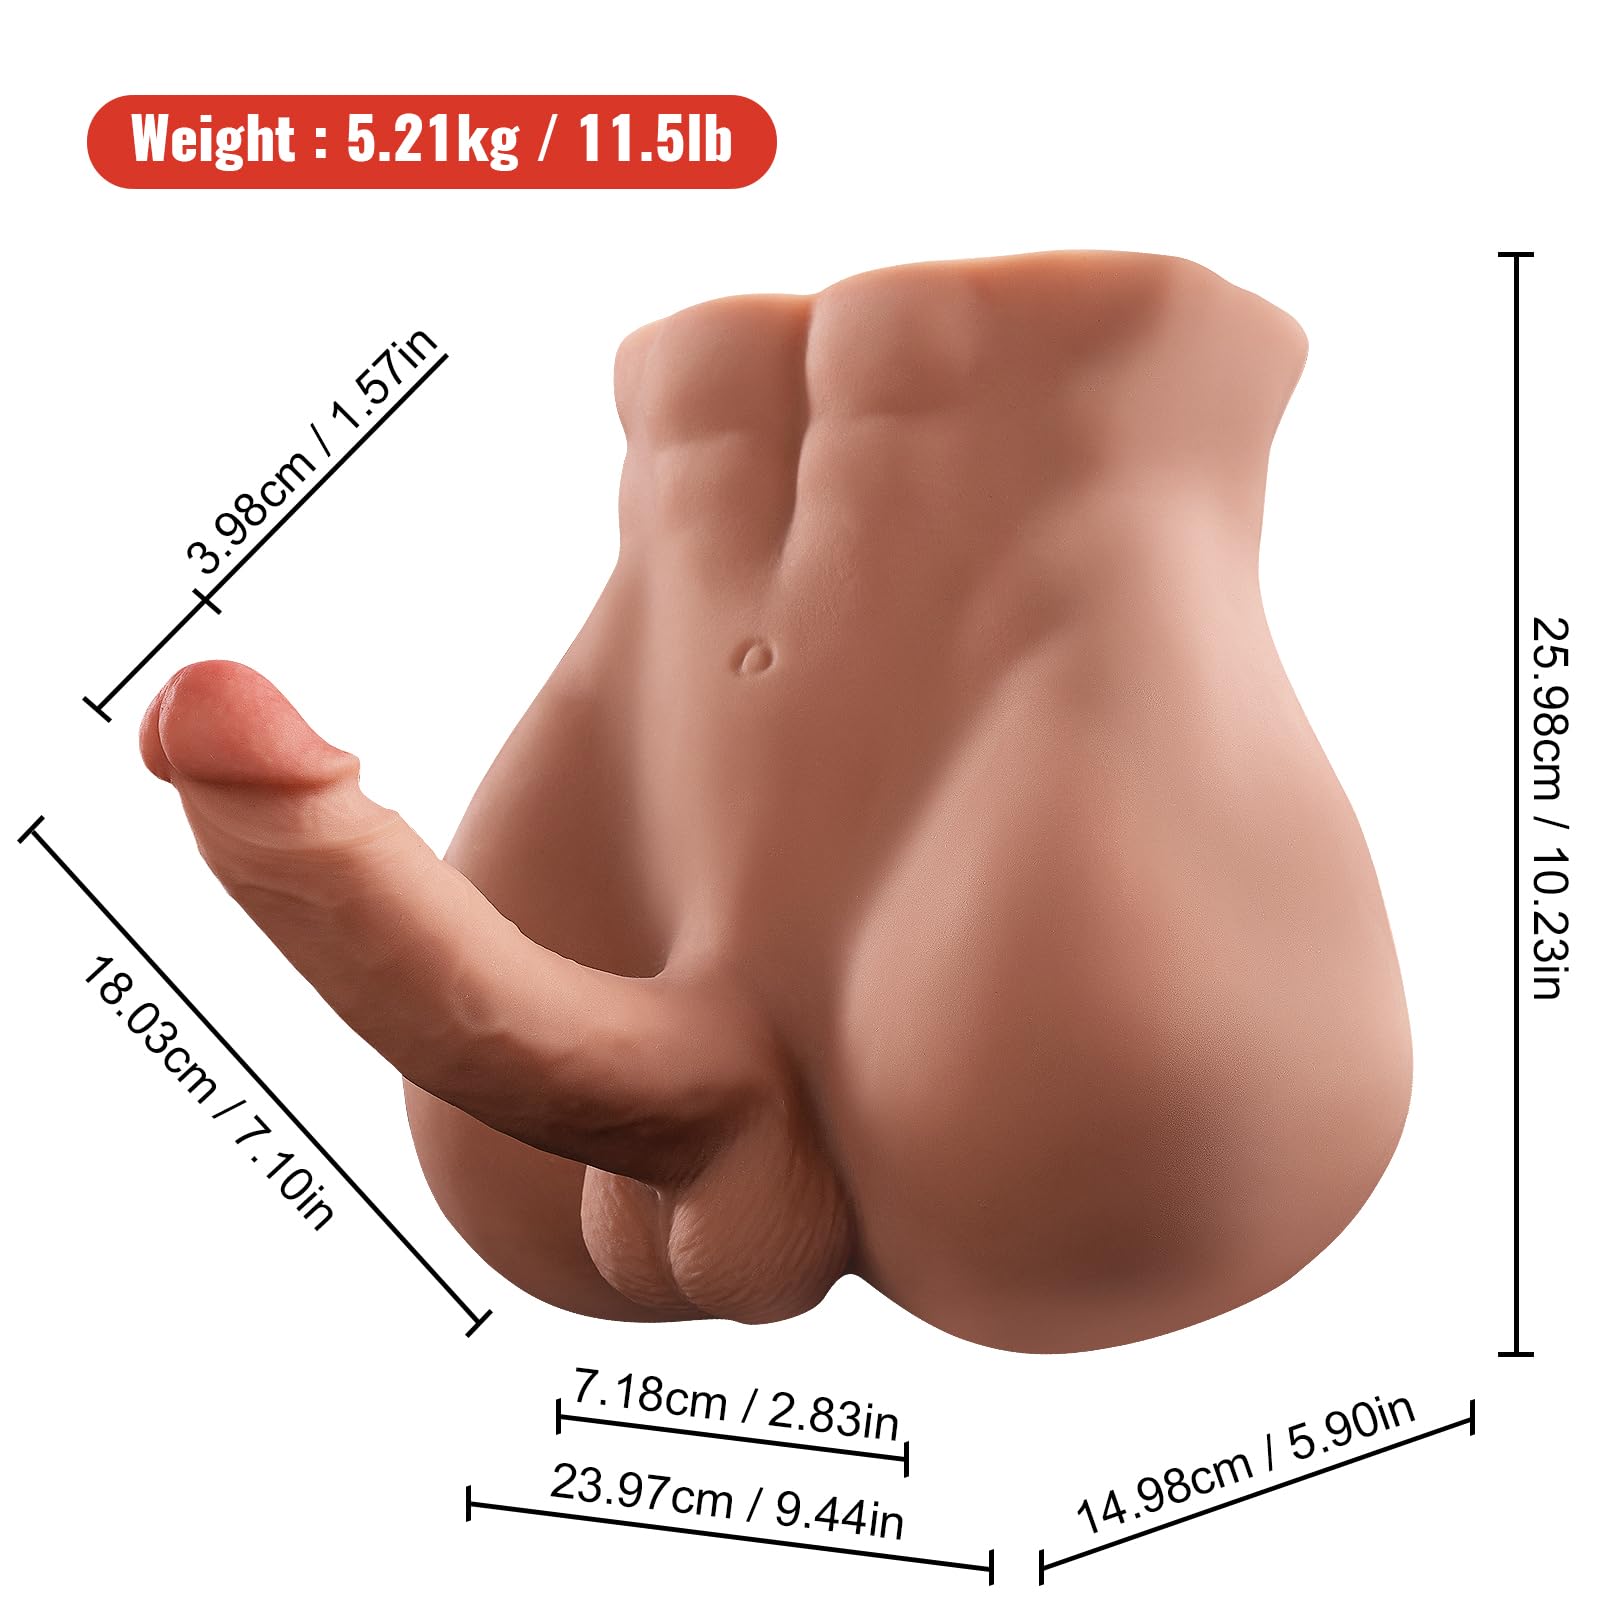 AUSLOVE Male Sex Doll for Women with 7.1in Telescoping Huge Dildo, 11.5LB Realistic Torso Sex Dolls for Men with Tight Anal, 2 in 1 Unisex Masturbator Sex Toy for Gay Couple, Brown